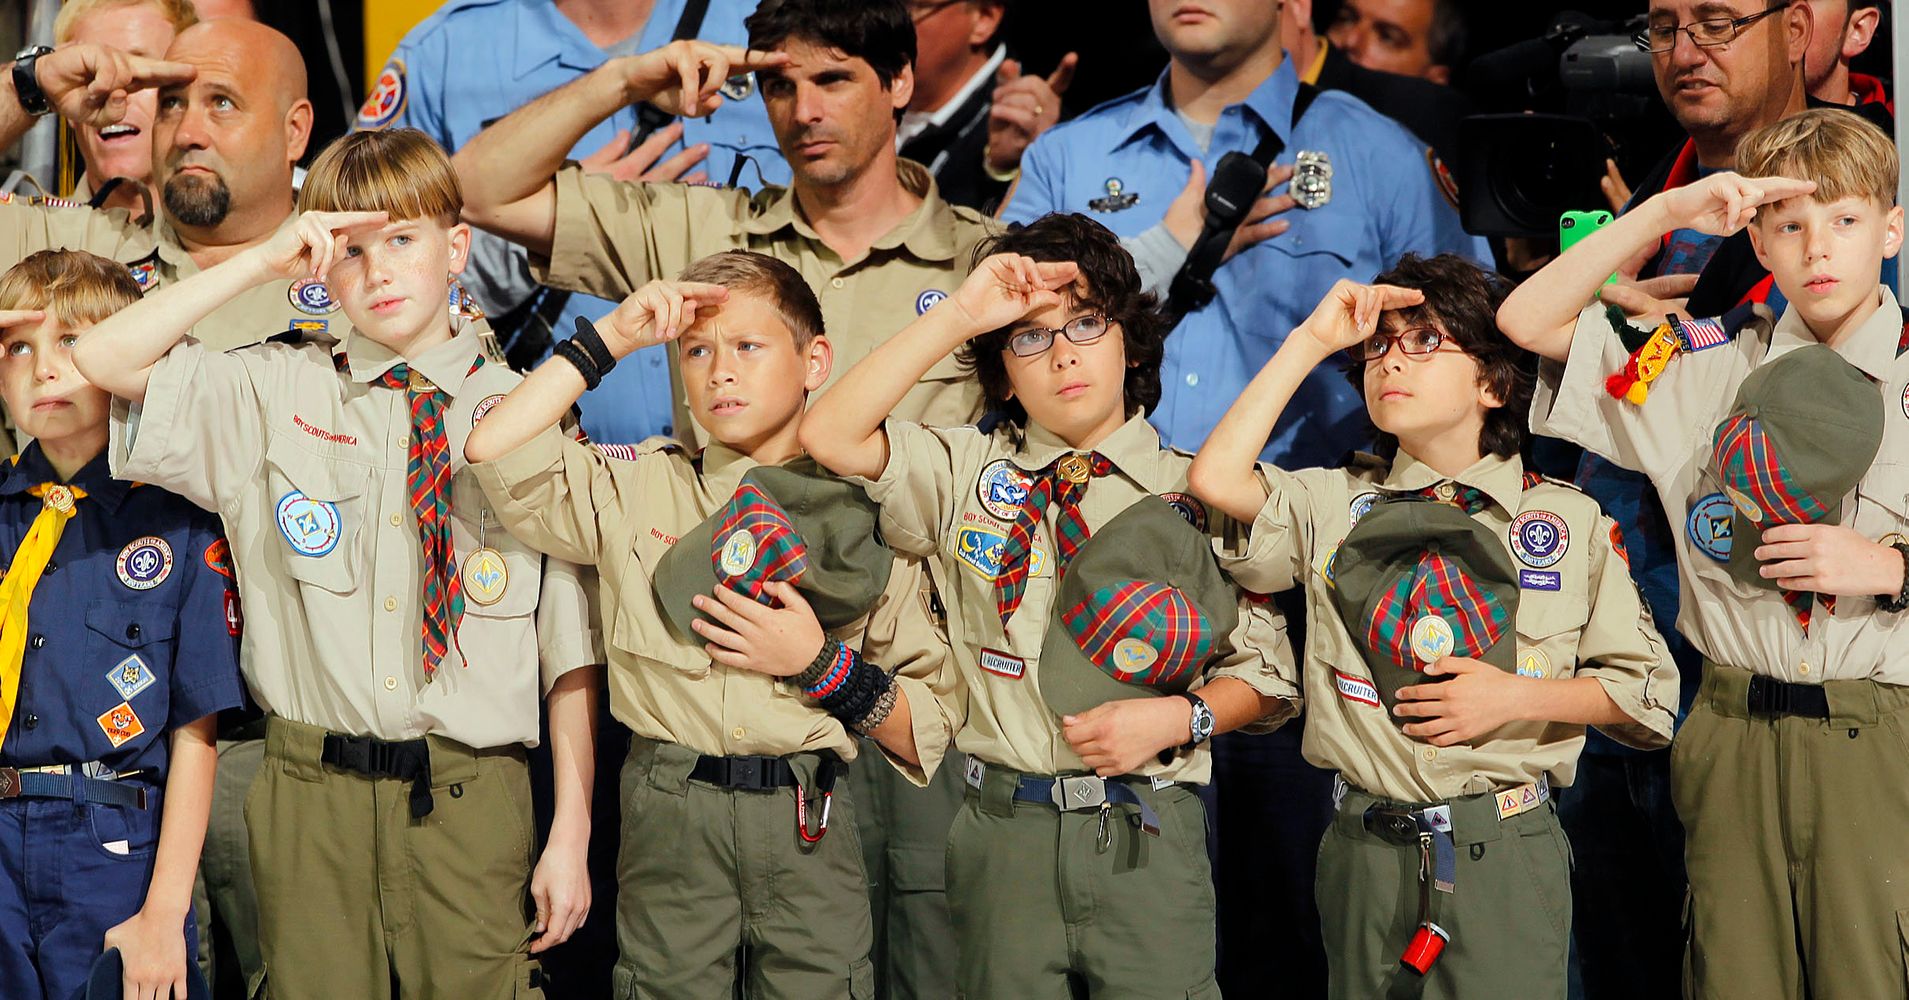 boy-scouts-file-chapter-11-bankruptcy-ministrywatch